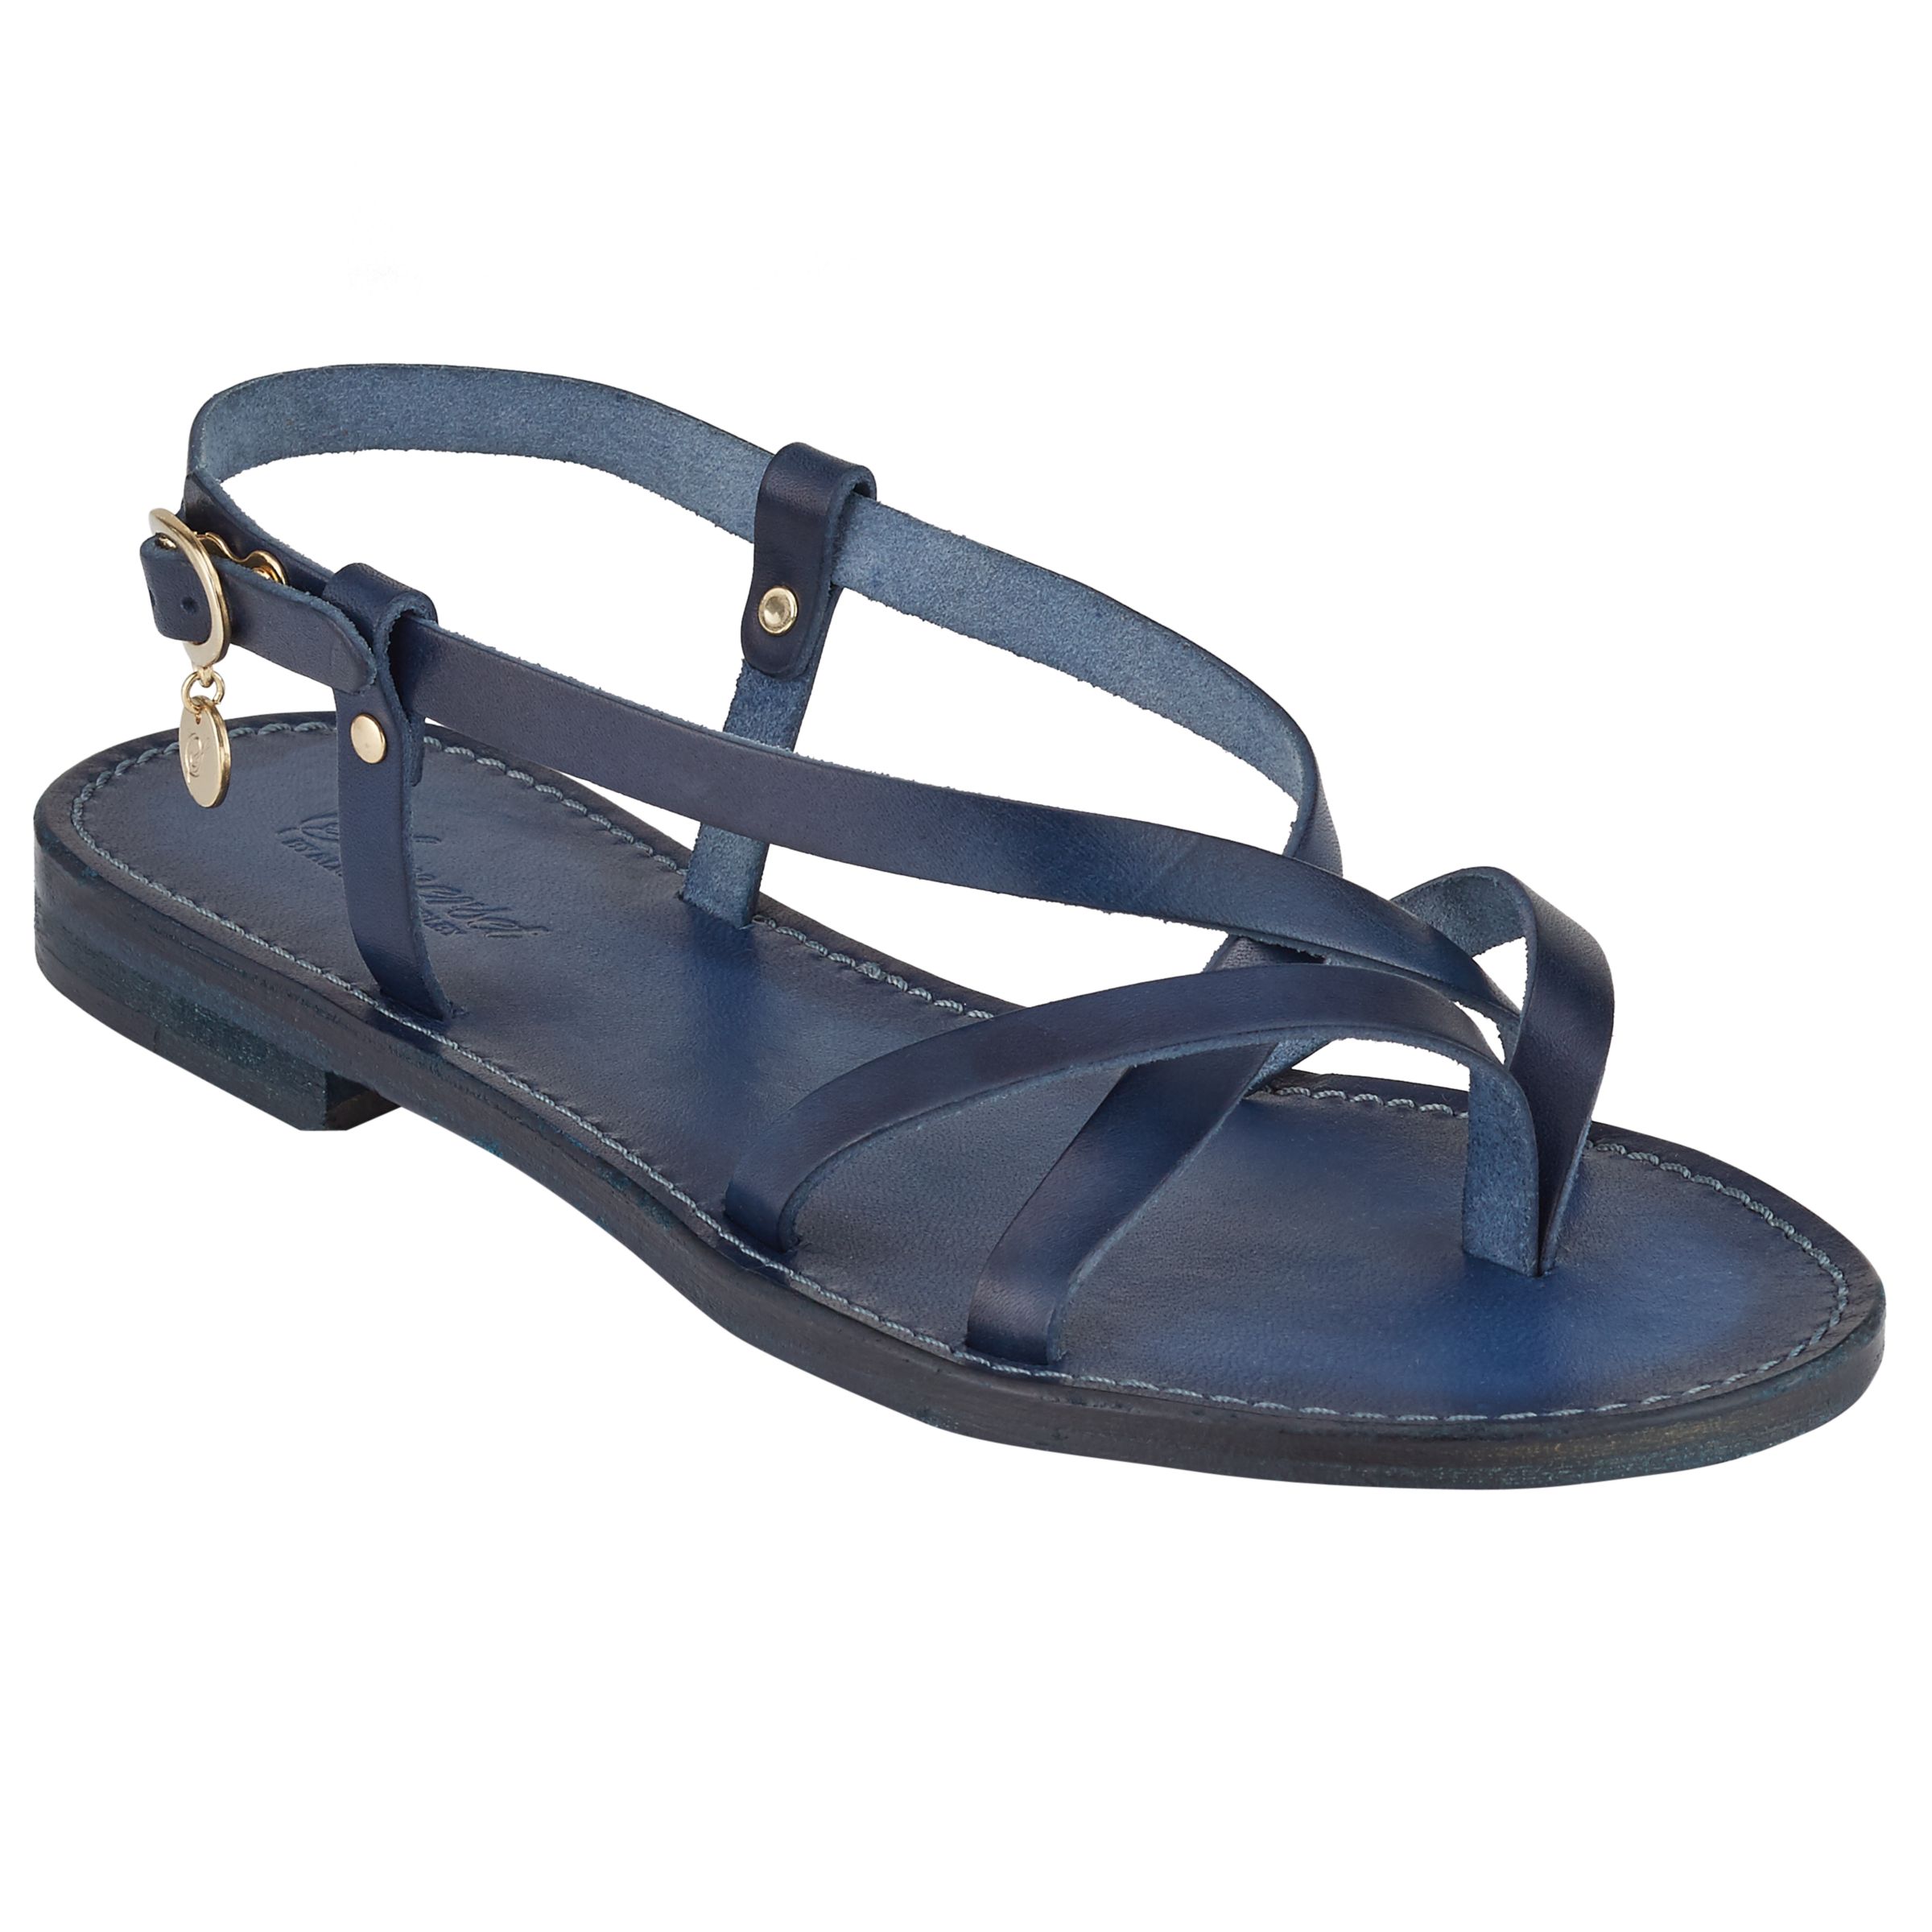 Somerset by Alice Temperley Loxton Sandals, Navy, 4